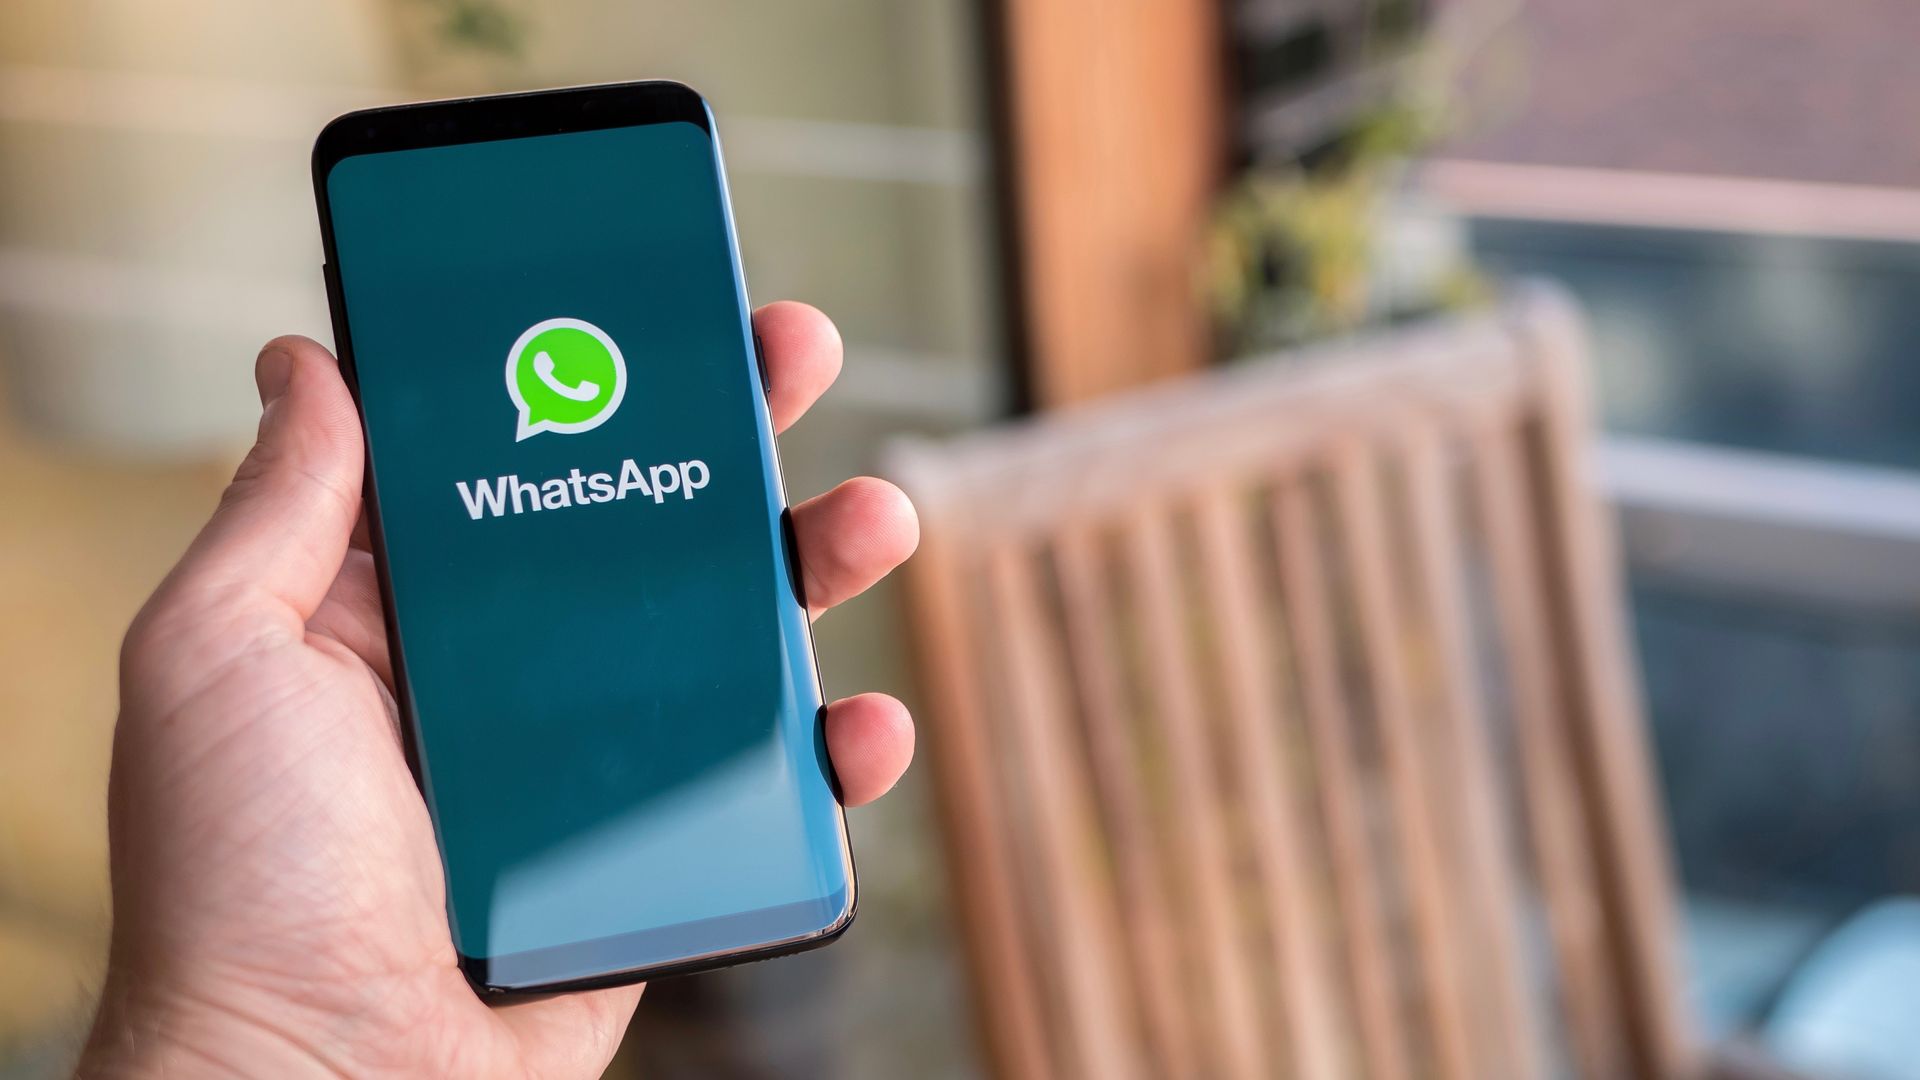 WhatsApp for iOS will get a Stories-like feature to the chat list